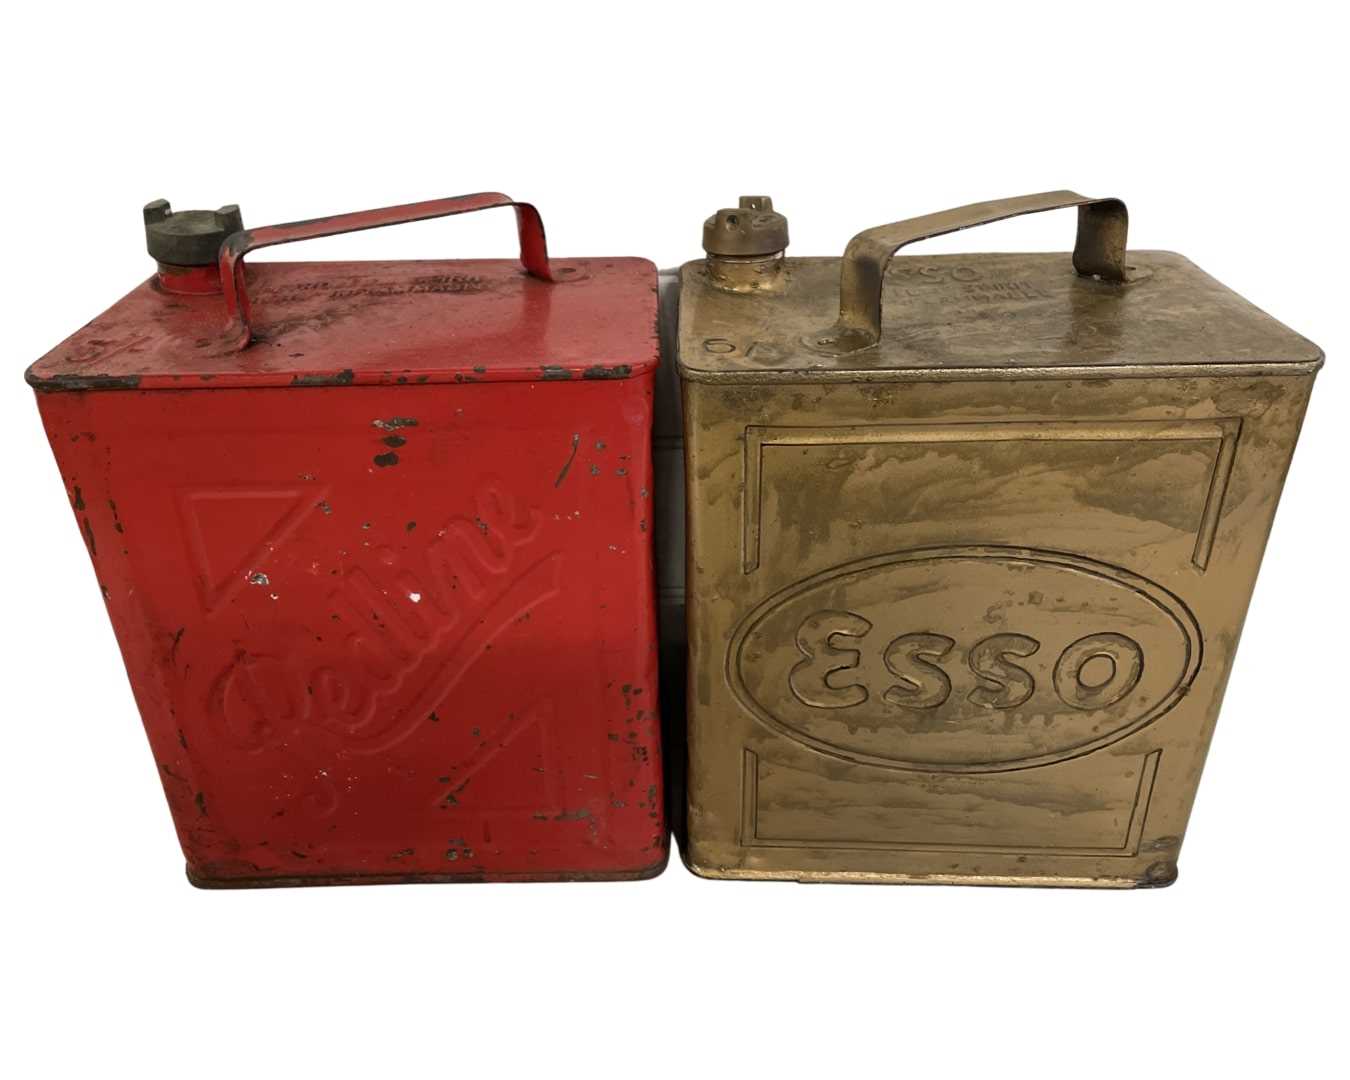 Pair of two gallon petrol cans, Esso and Red Line - Image 2 of 4